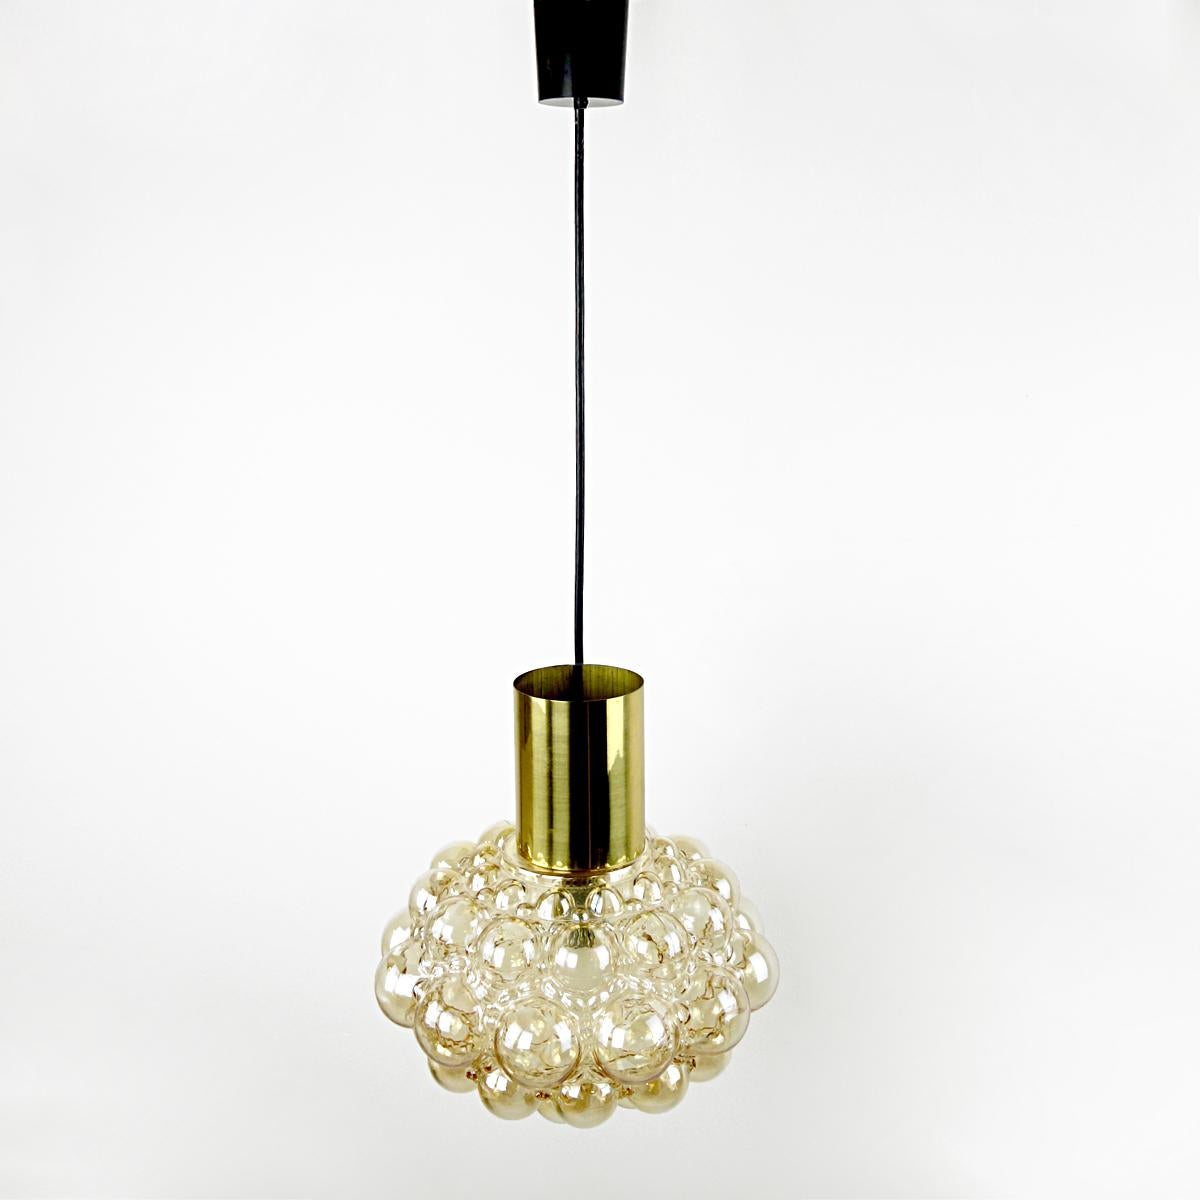 Glass and brass pendant designed in the 1960s by Helena Tynell and Heinrich Gatenbrink for Glashütte Limburg. 
The lampshade is made of glass with an amber color and has a bubbly pattern. The carrier of the lampshade is made of brass.